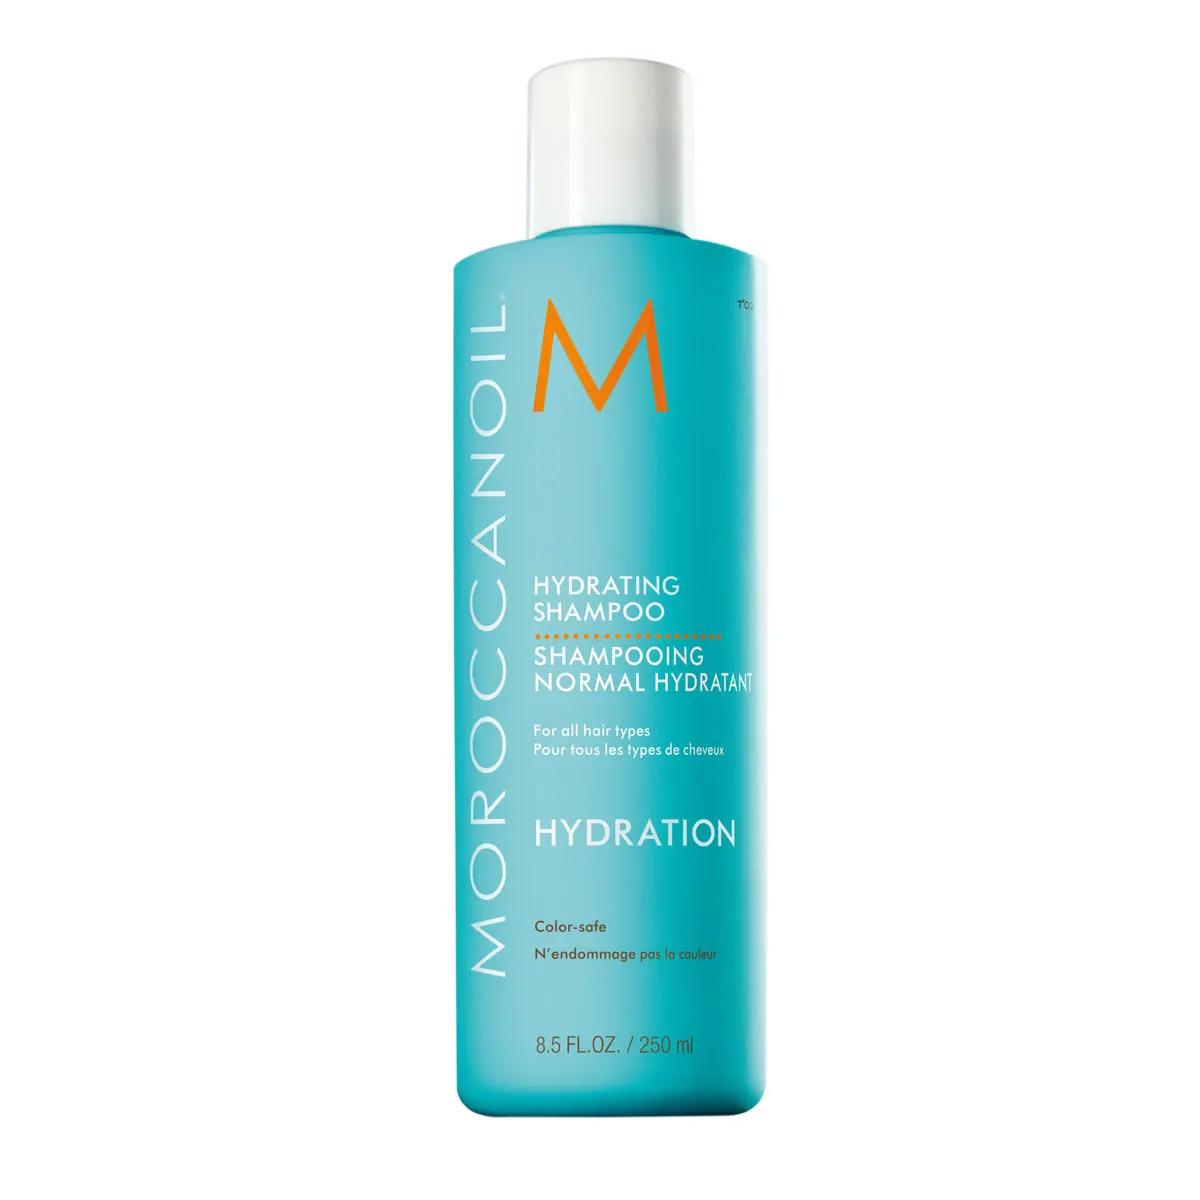 MOROCCANOIL Hydrating Shampoo 250ml Discounts and Cashback